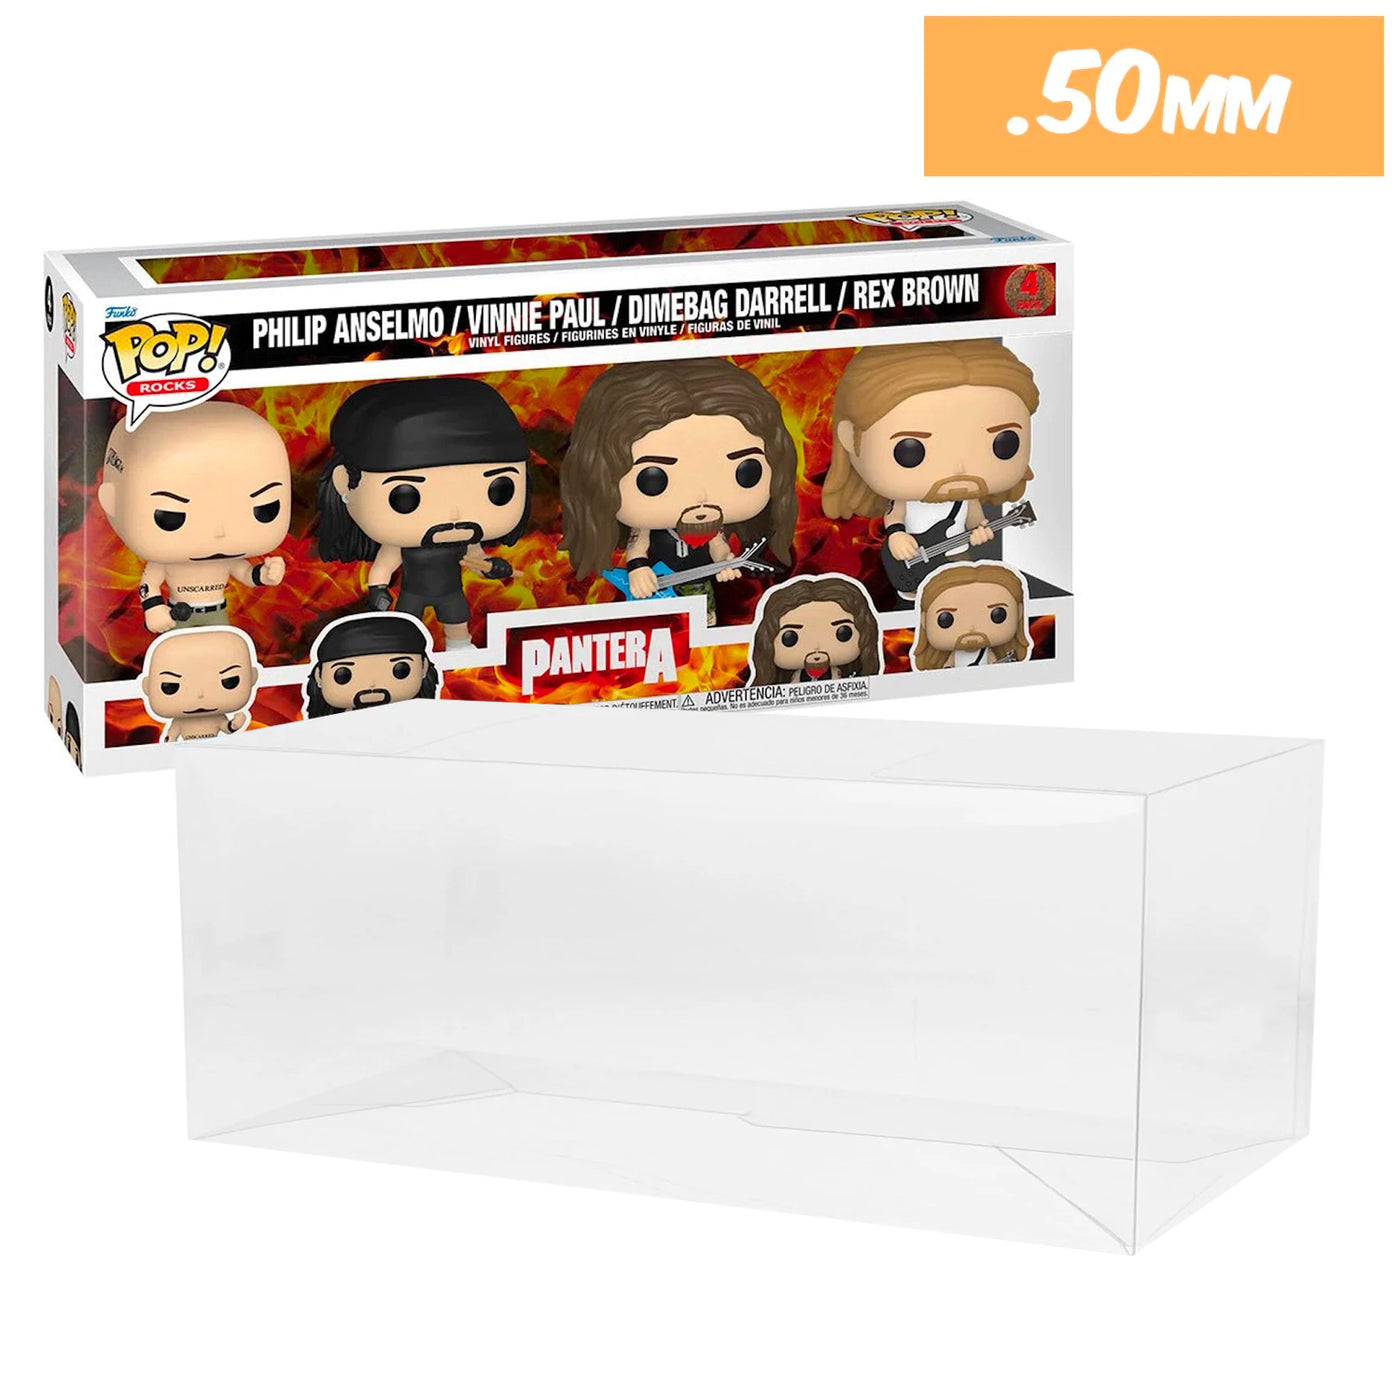 pantera 4 pack best funko pop protectors thick strong uv scratch flat top stack vinyl display geek plastic shield vaulted eco armor fits collect protect display case kollector protector philip anselmo vinnie paul dimebag darrell rex brown